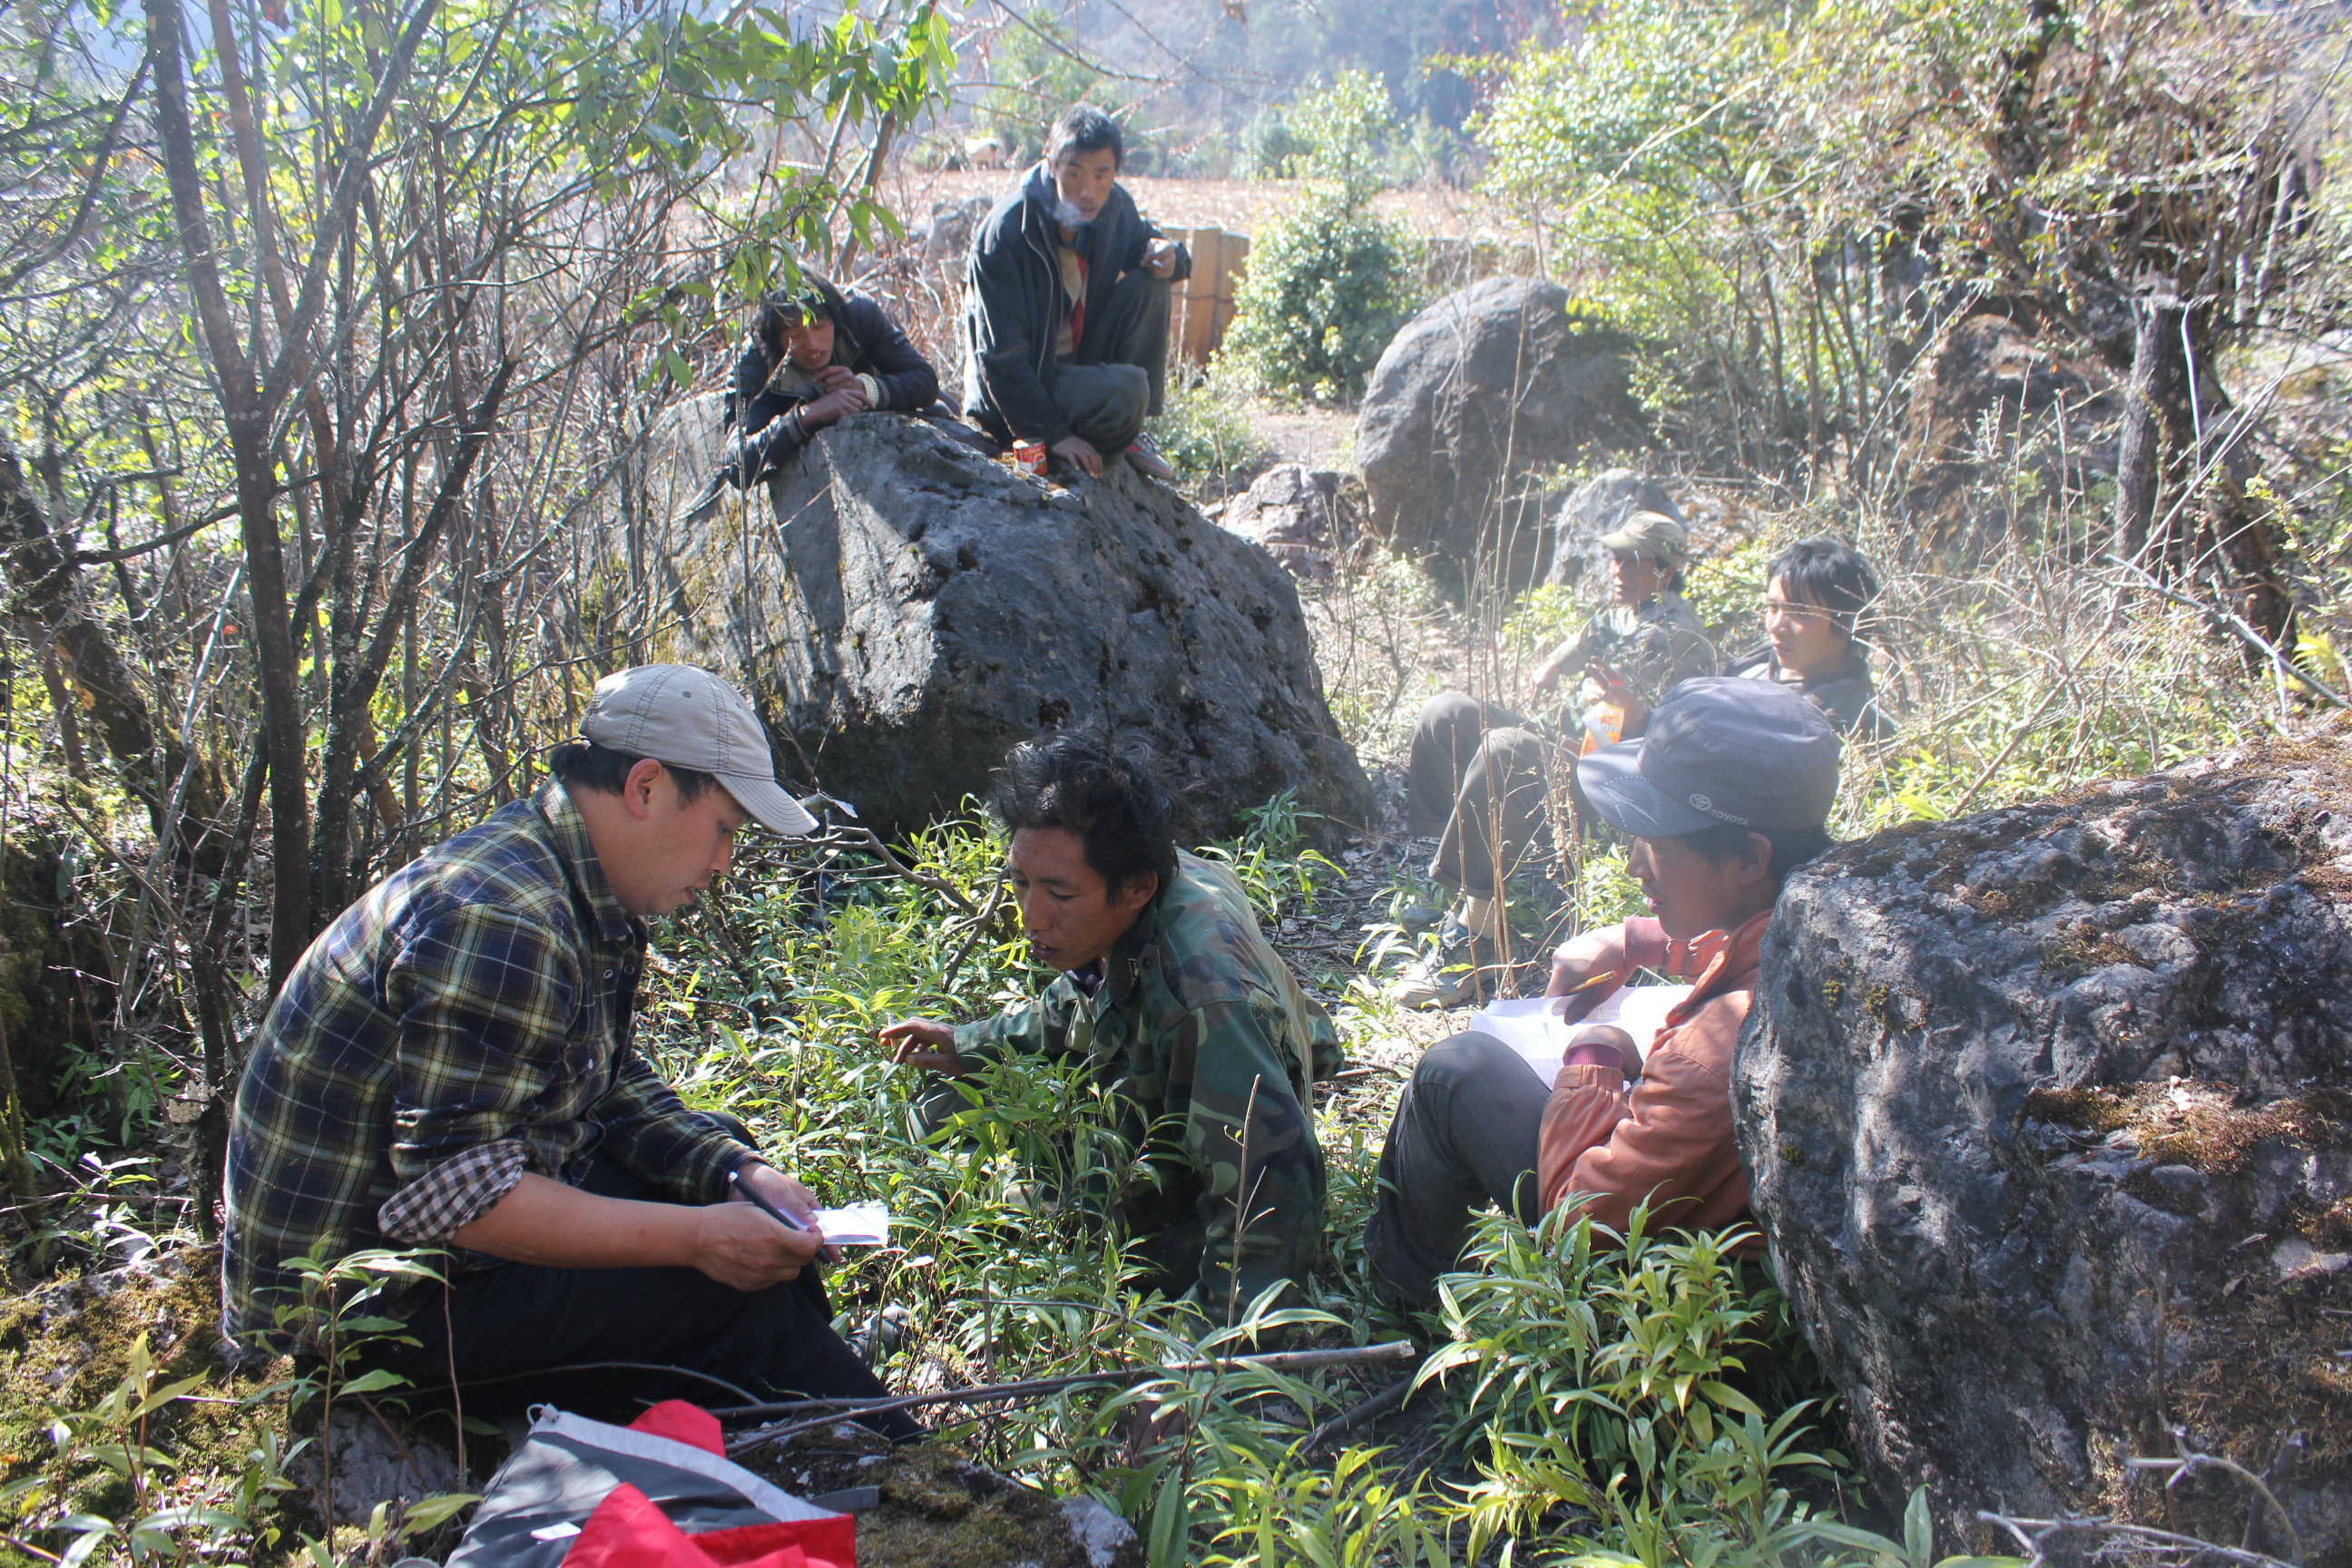 Daily work of forest rangers in Yunnan province